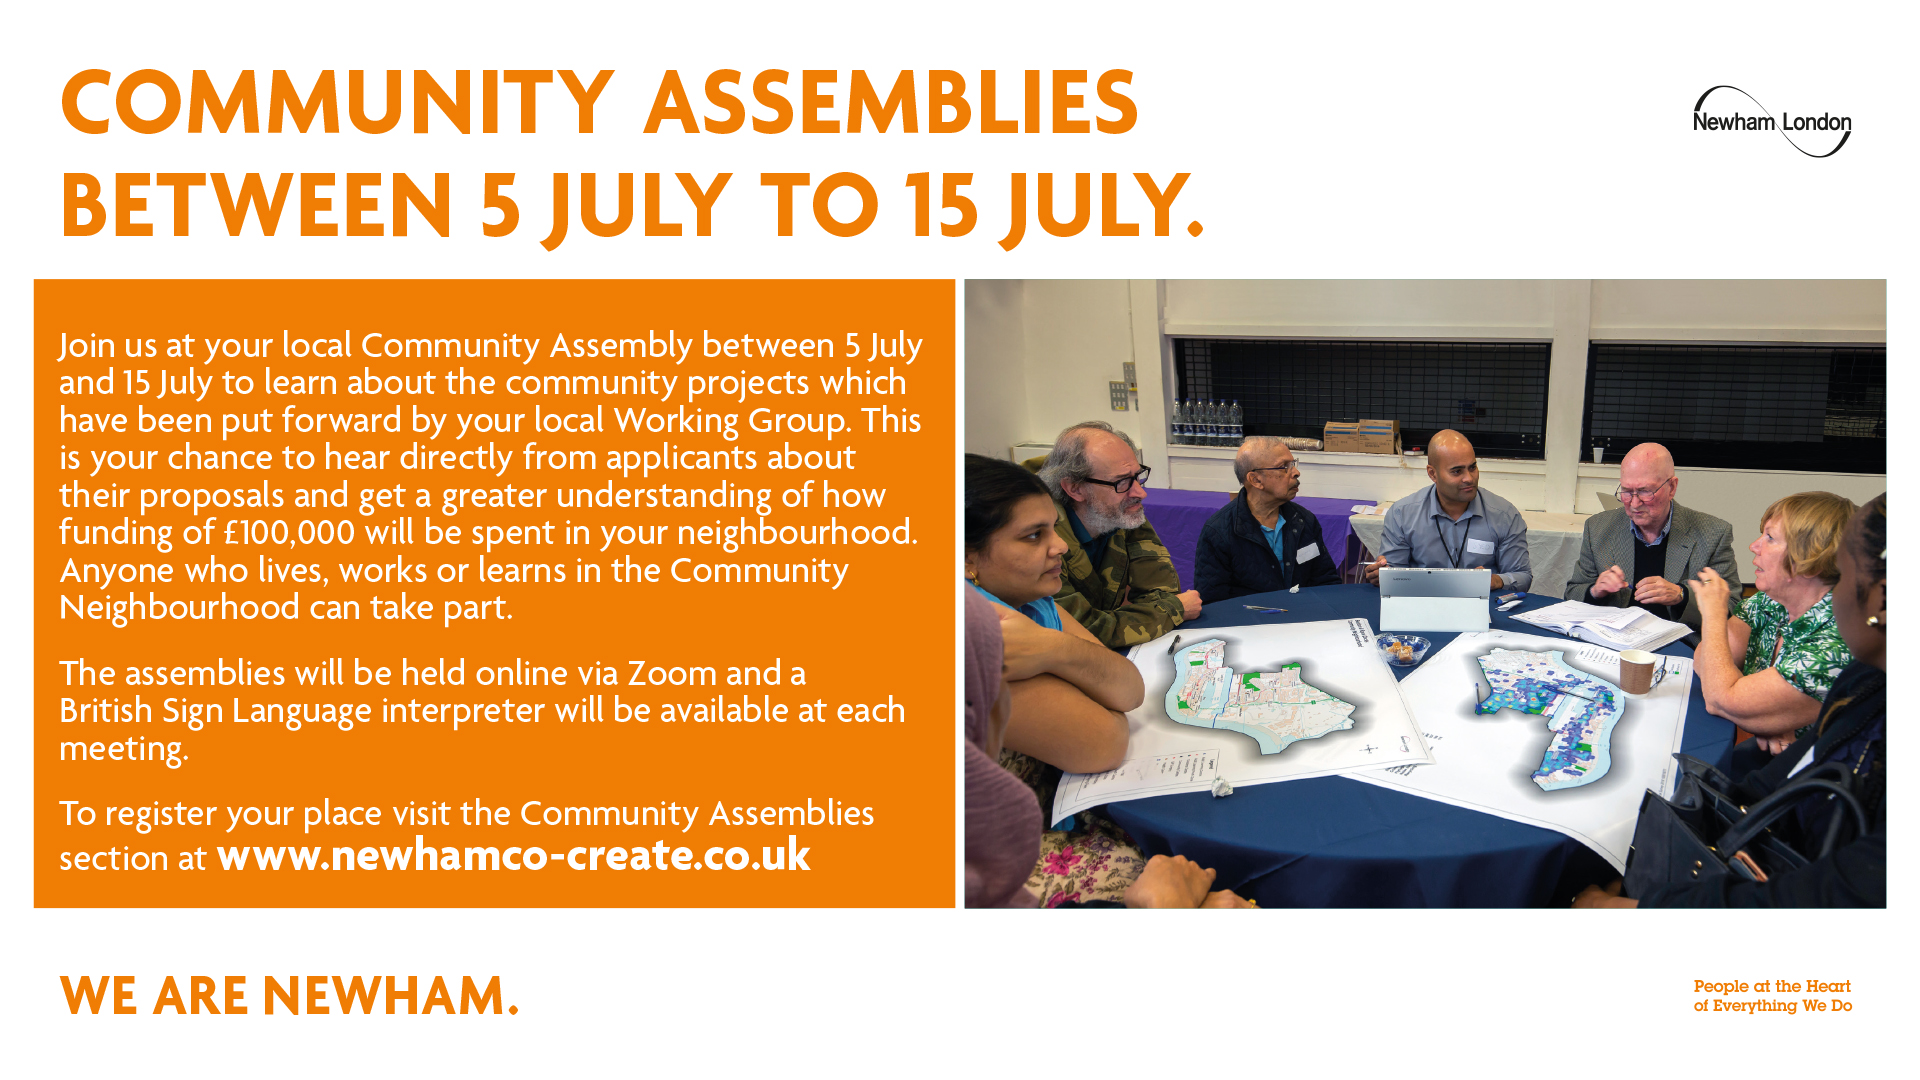 Community assemblies between 5 July to 15 July